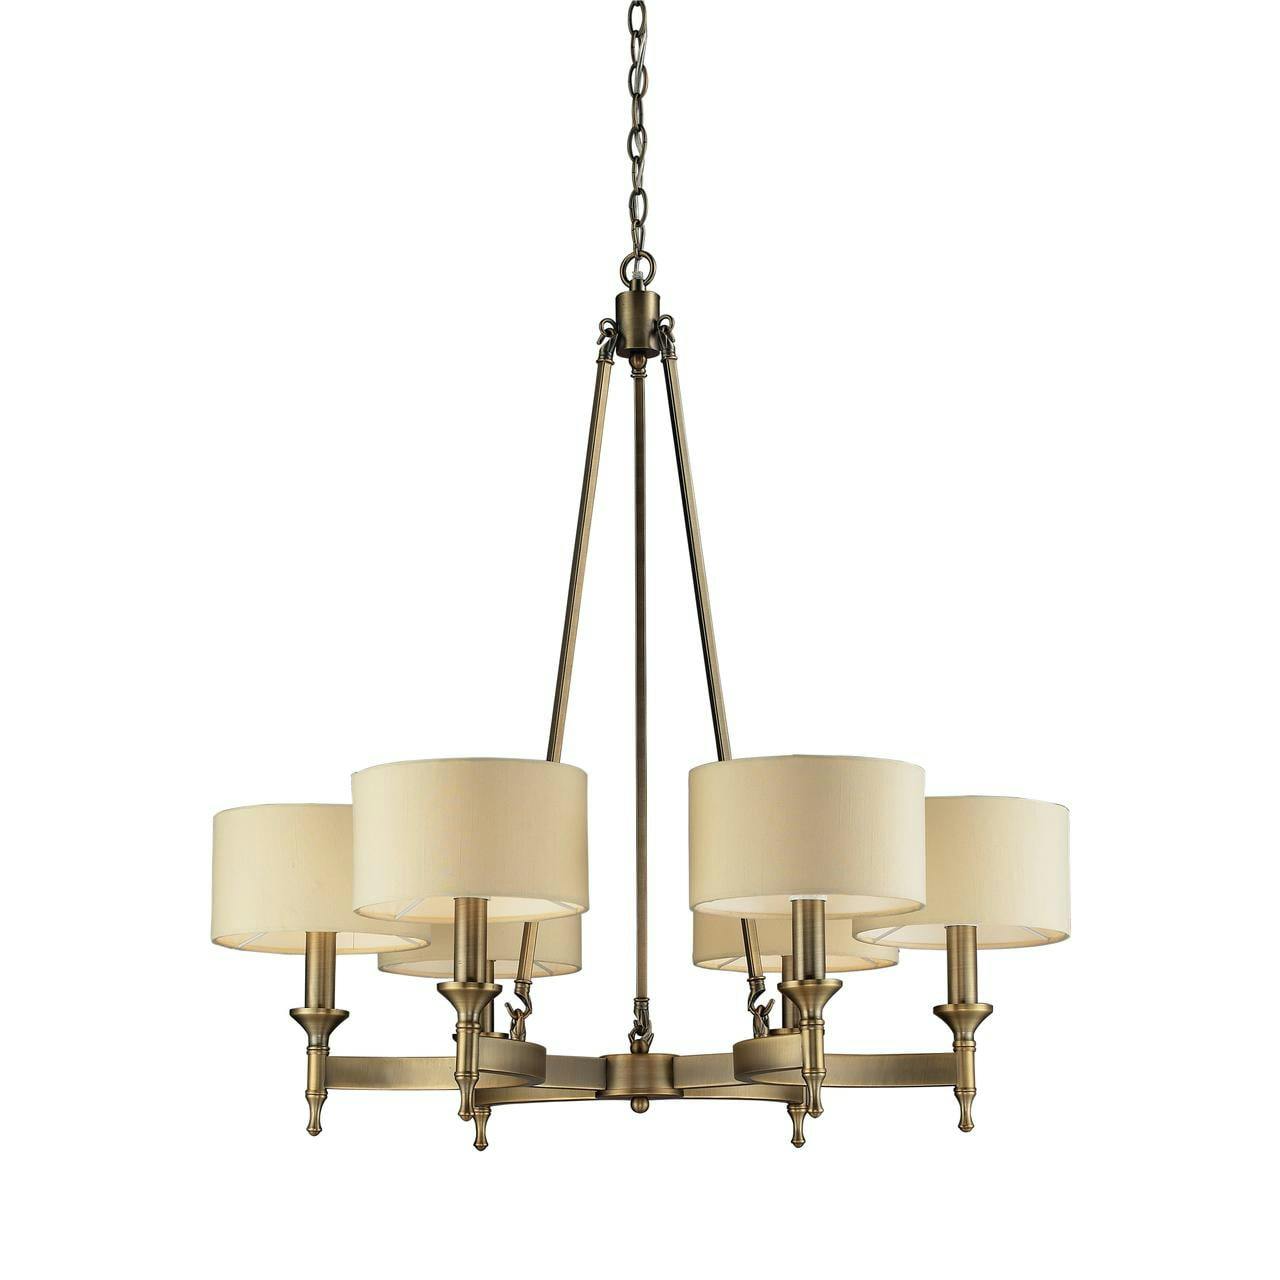 Antique Brass Concave Arm 6-Light Chandelier with Light Tan Drum Shades